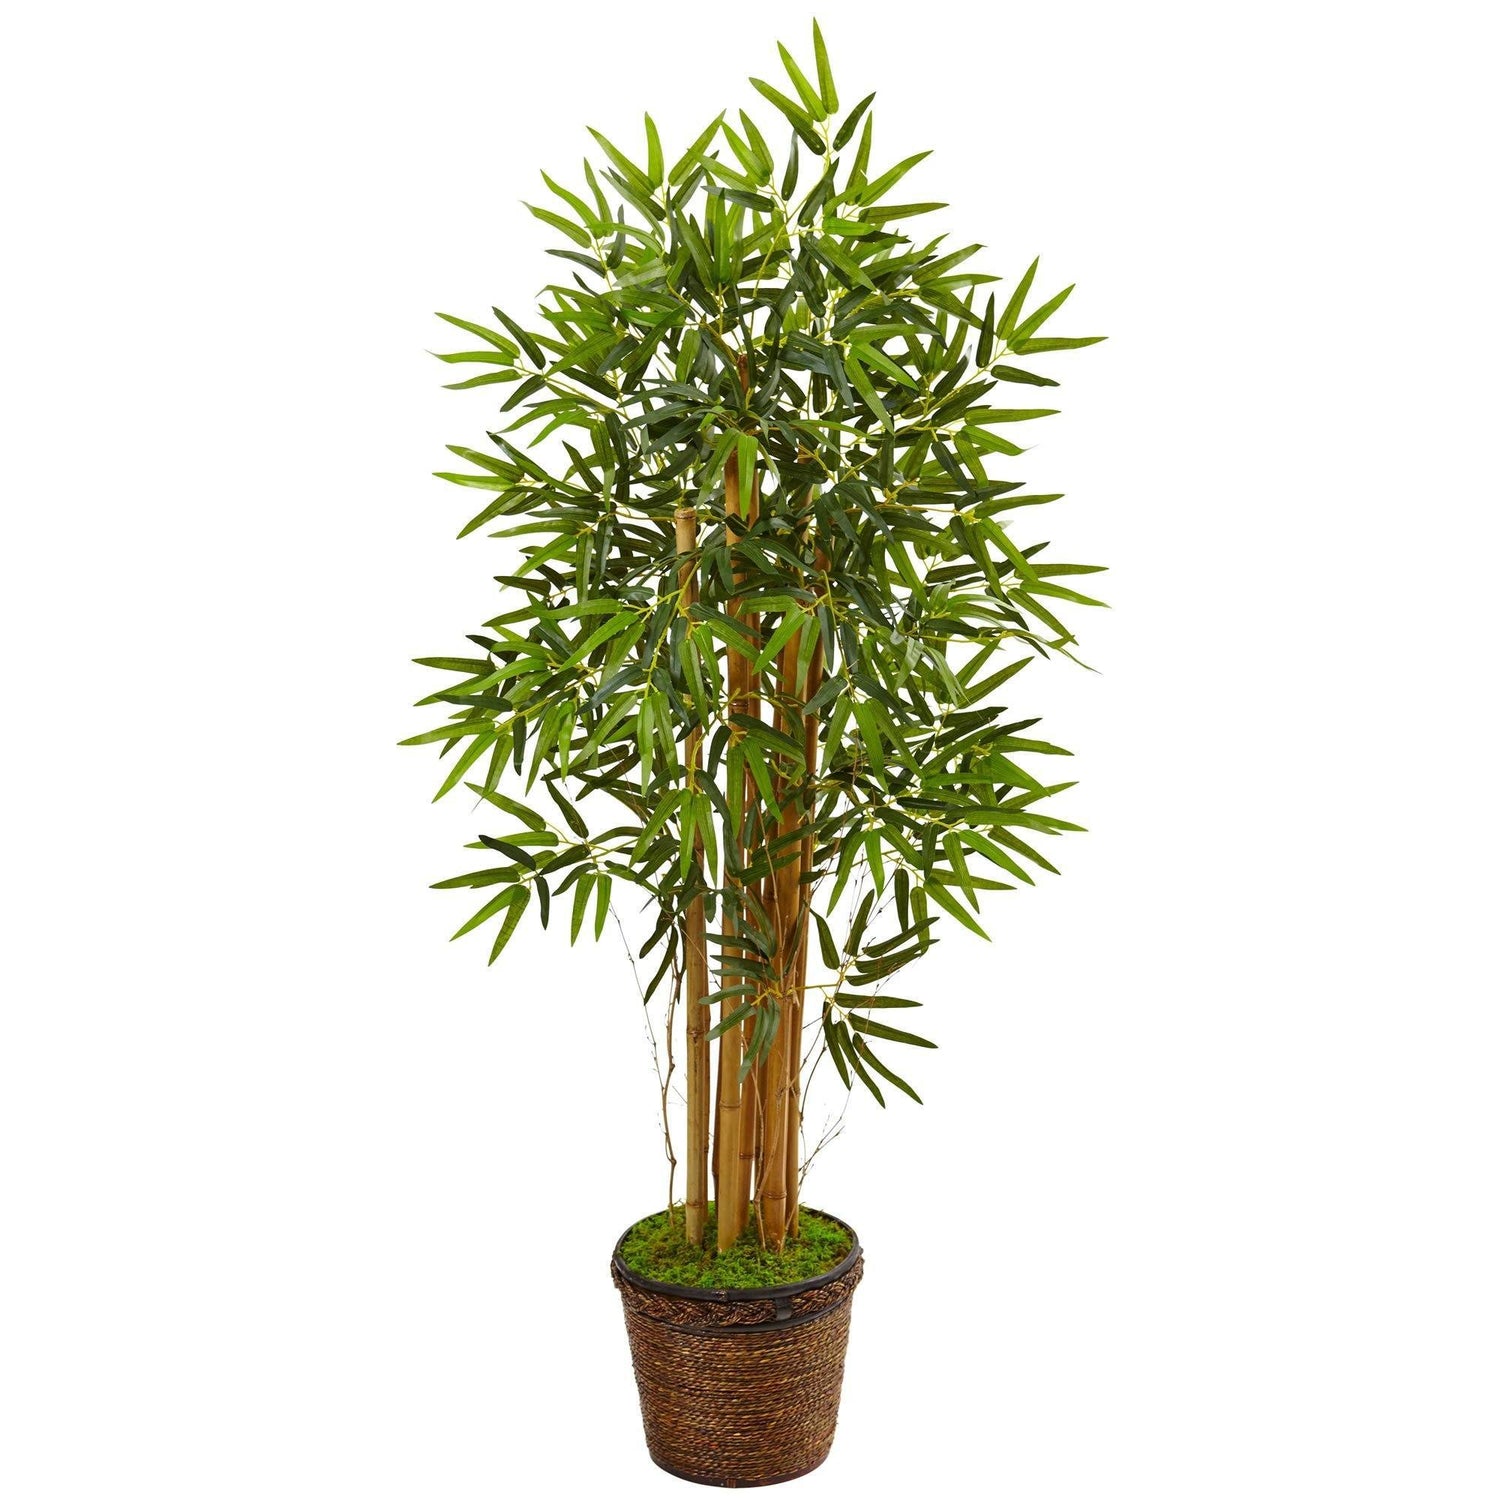 4.5’ Bamboo Tree in Coiled Rope Planter